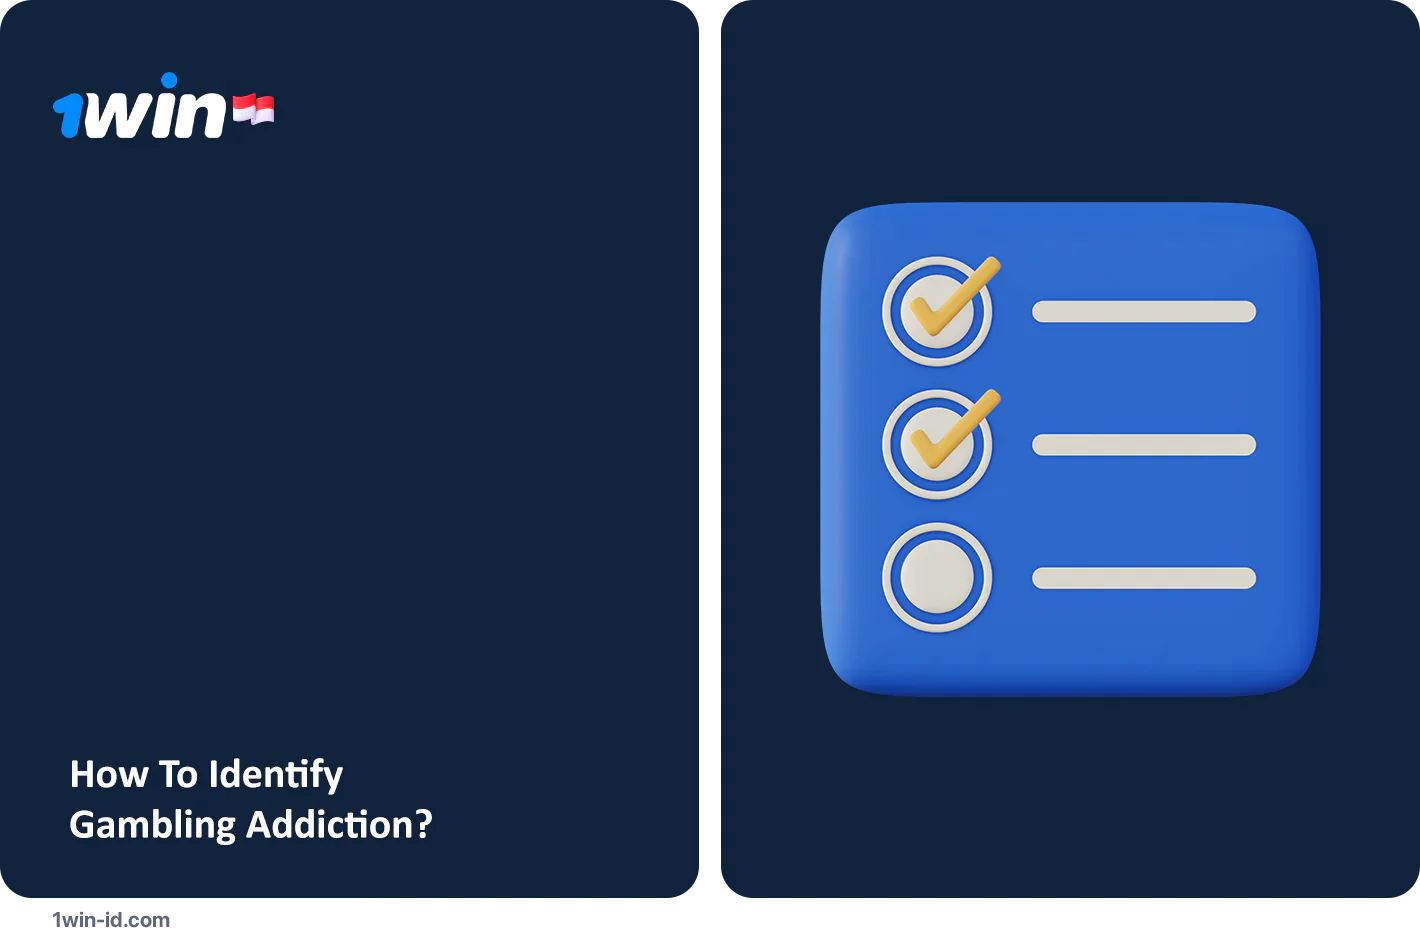 How to identify gambling addiction - a simple test - 1Win